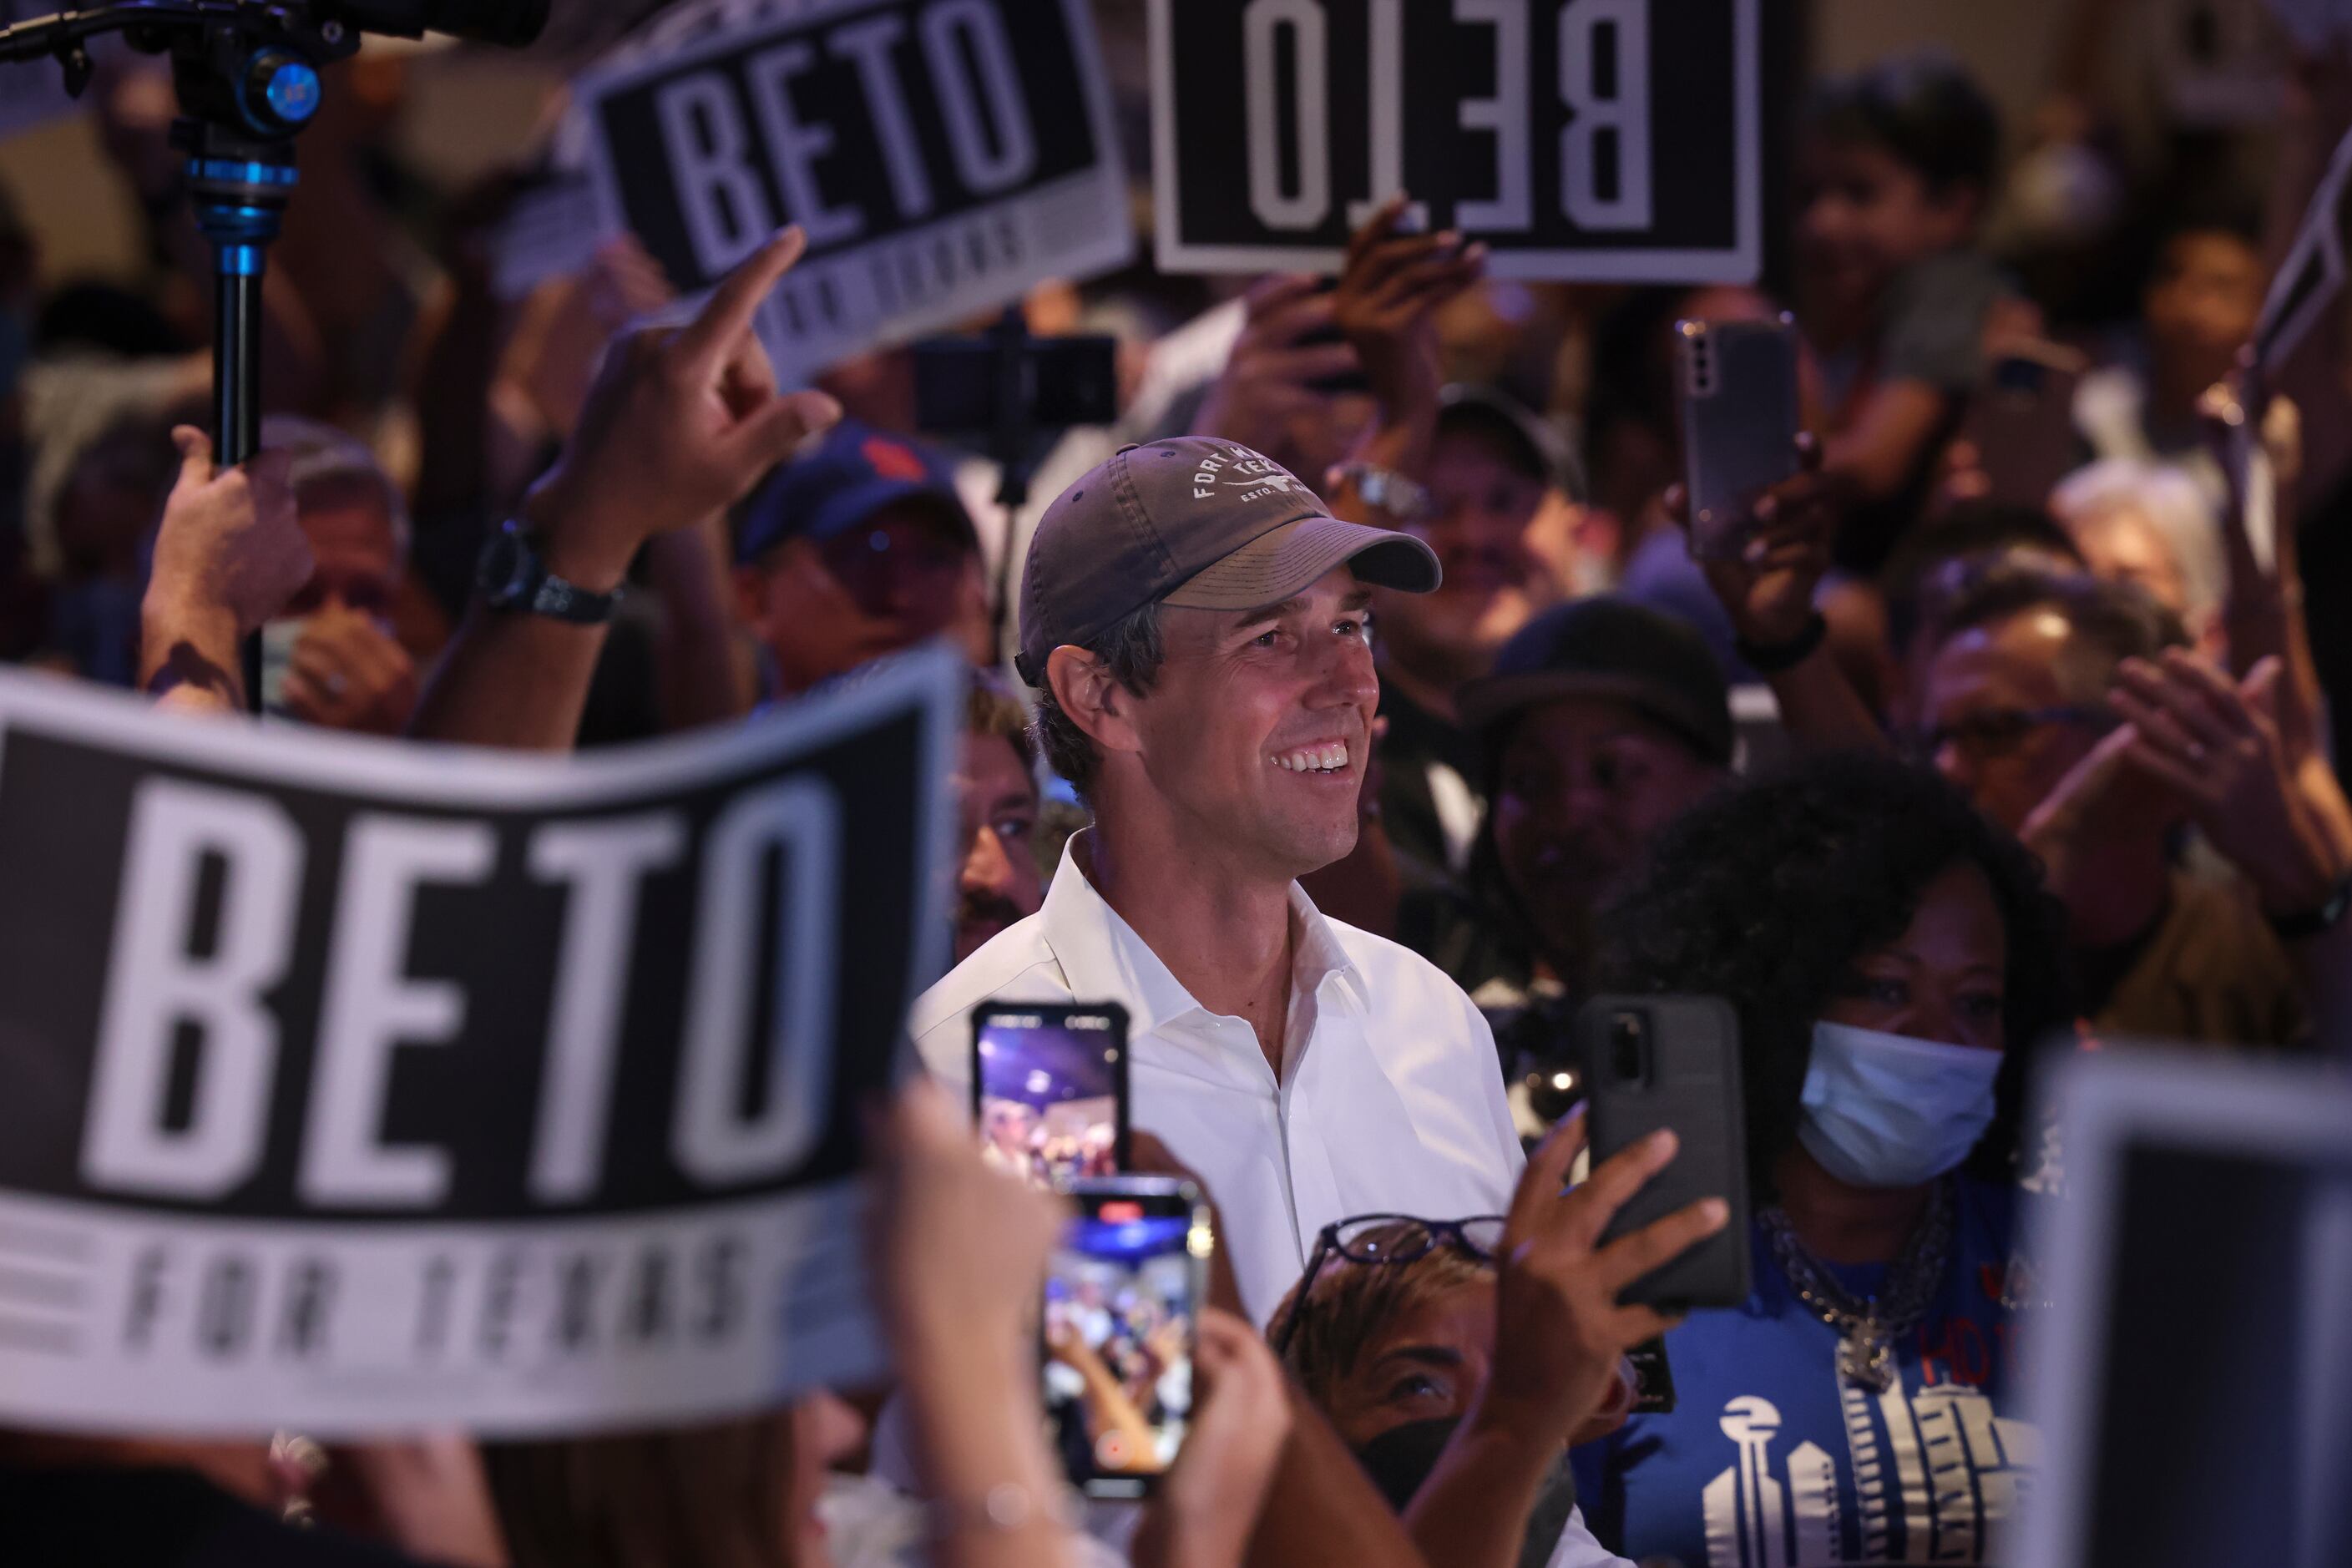 Democratic Governor Candidate Beto O'Rourke walks through the crowd, Saturday, August 20,...